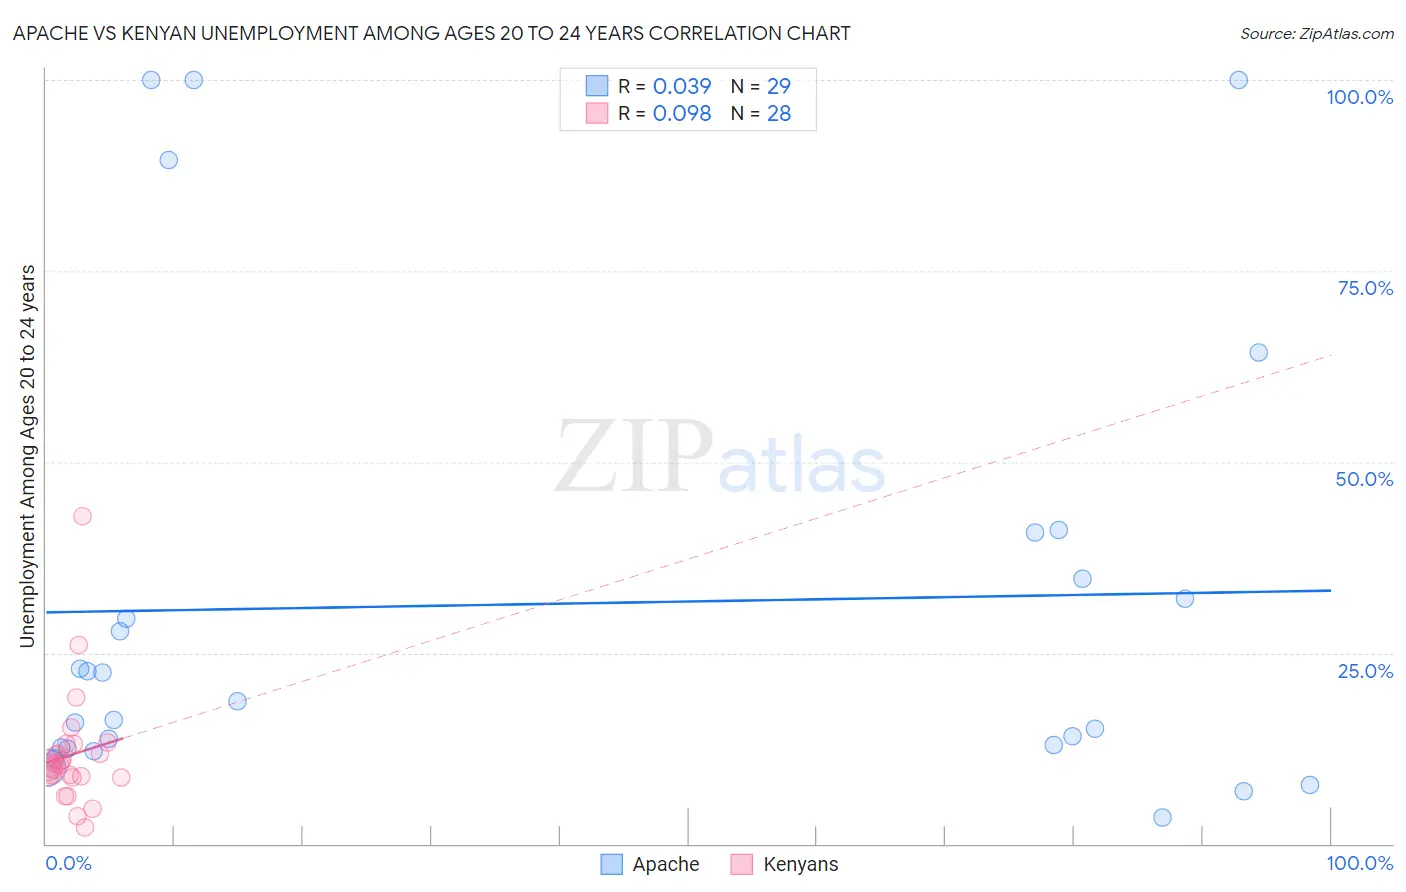 Apache vs Kenyan Unemployment Among Ages 20 to 24 years